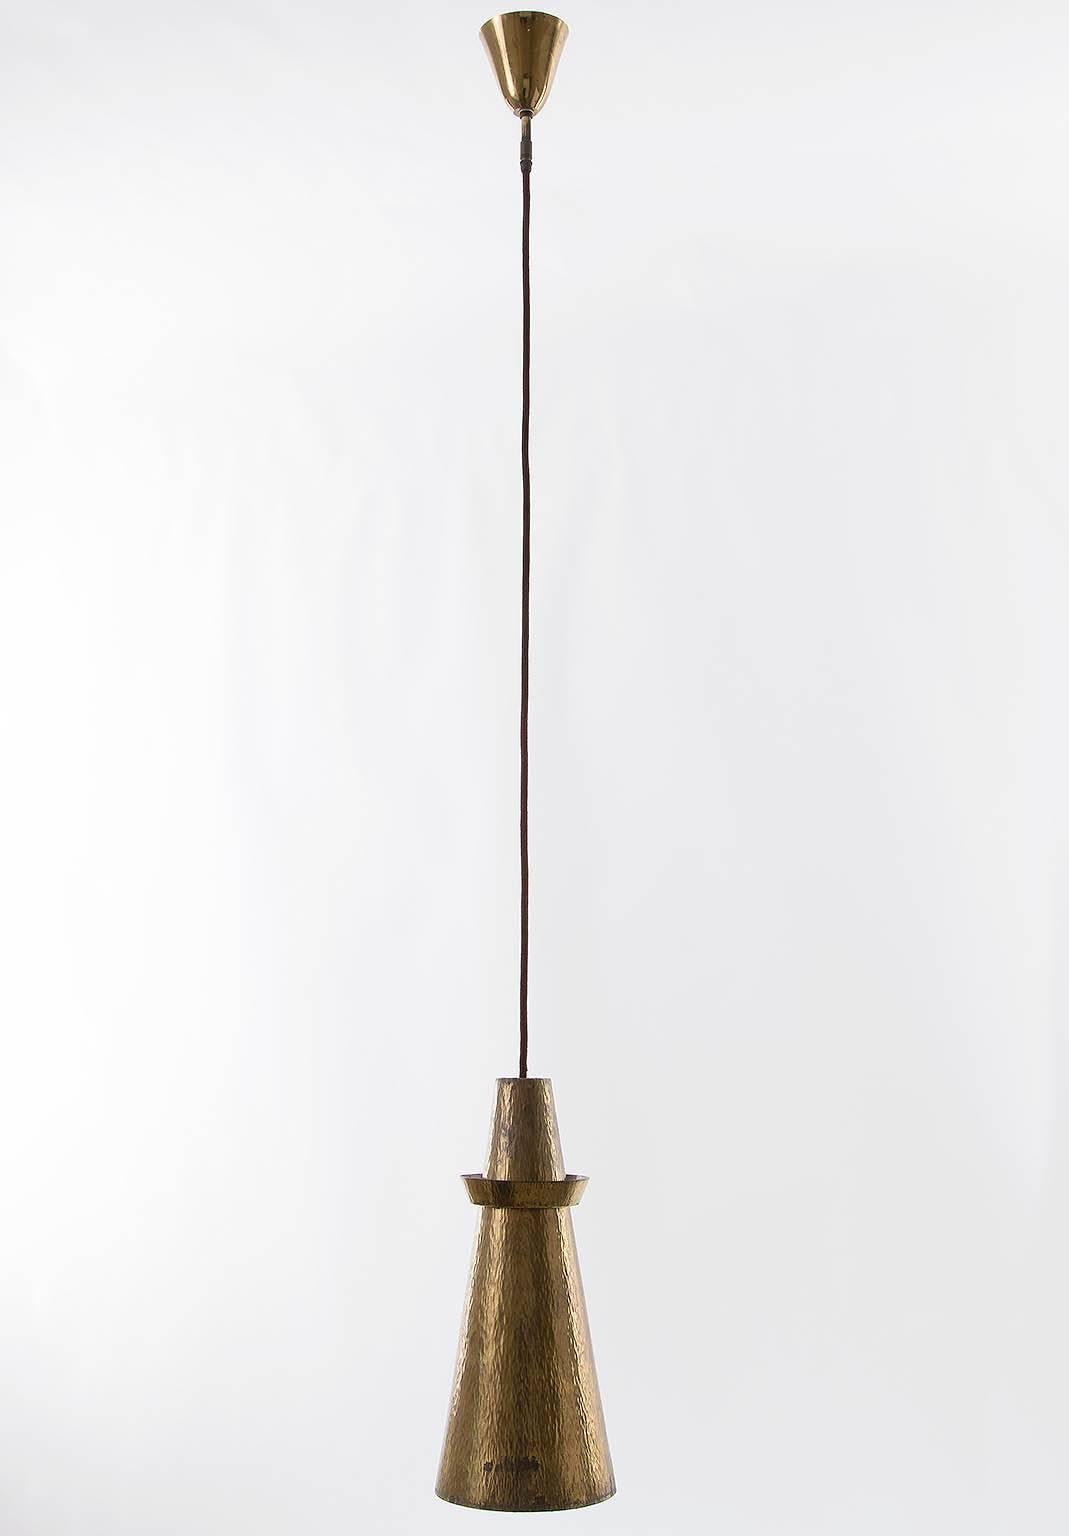 One of Six Pendant Lights, Hammered Patinated Brass, 1960s For Sale 1